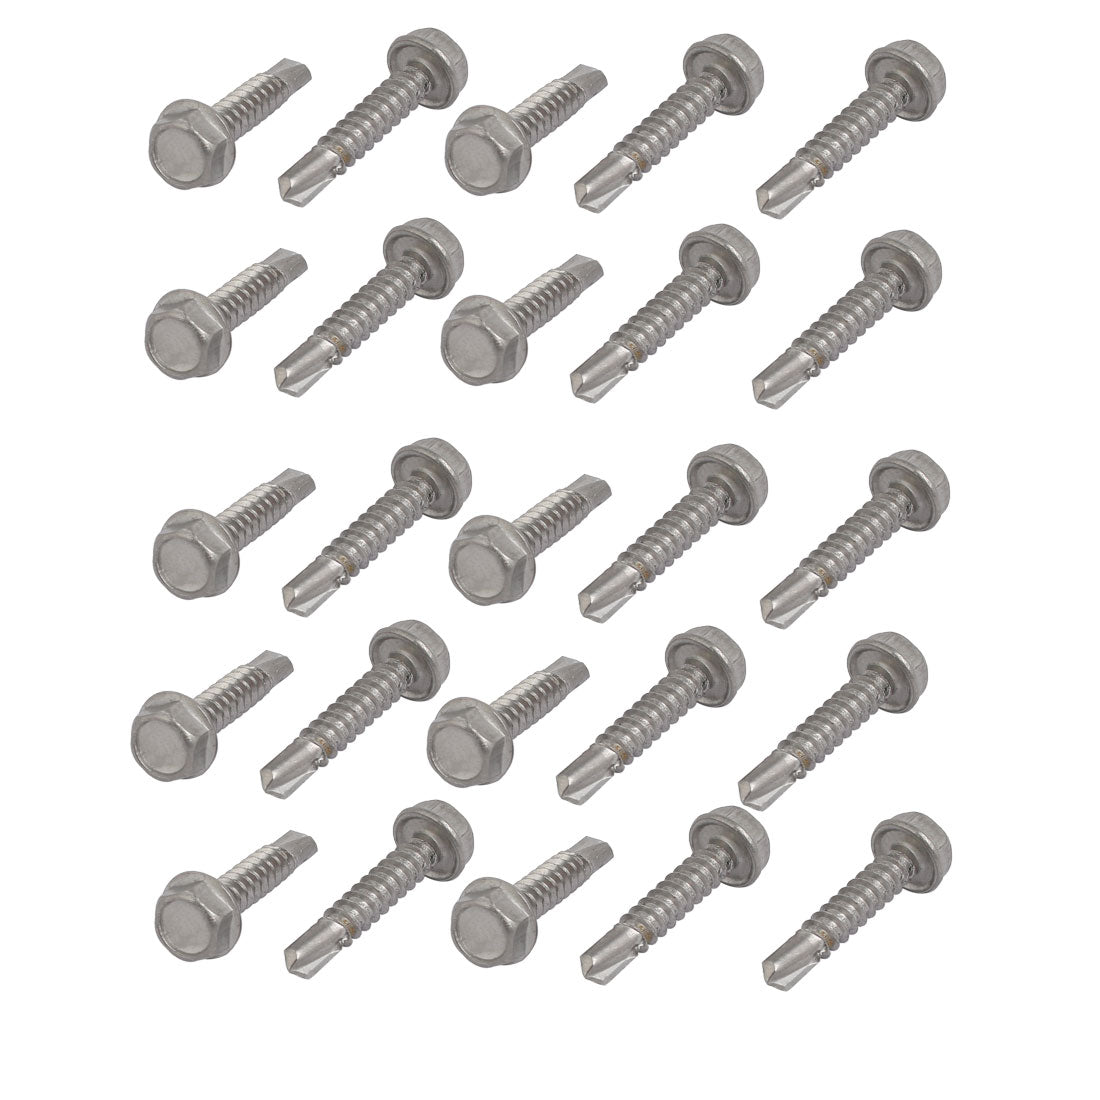 uxcell Uxcell M4.8x25mm 410 Stainless Steel Self Tapping Drilling Hex Flange Bolt 25pcs